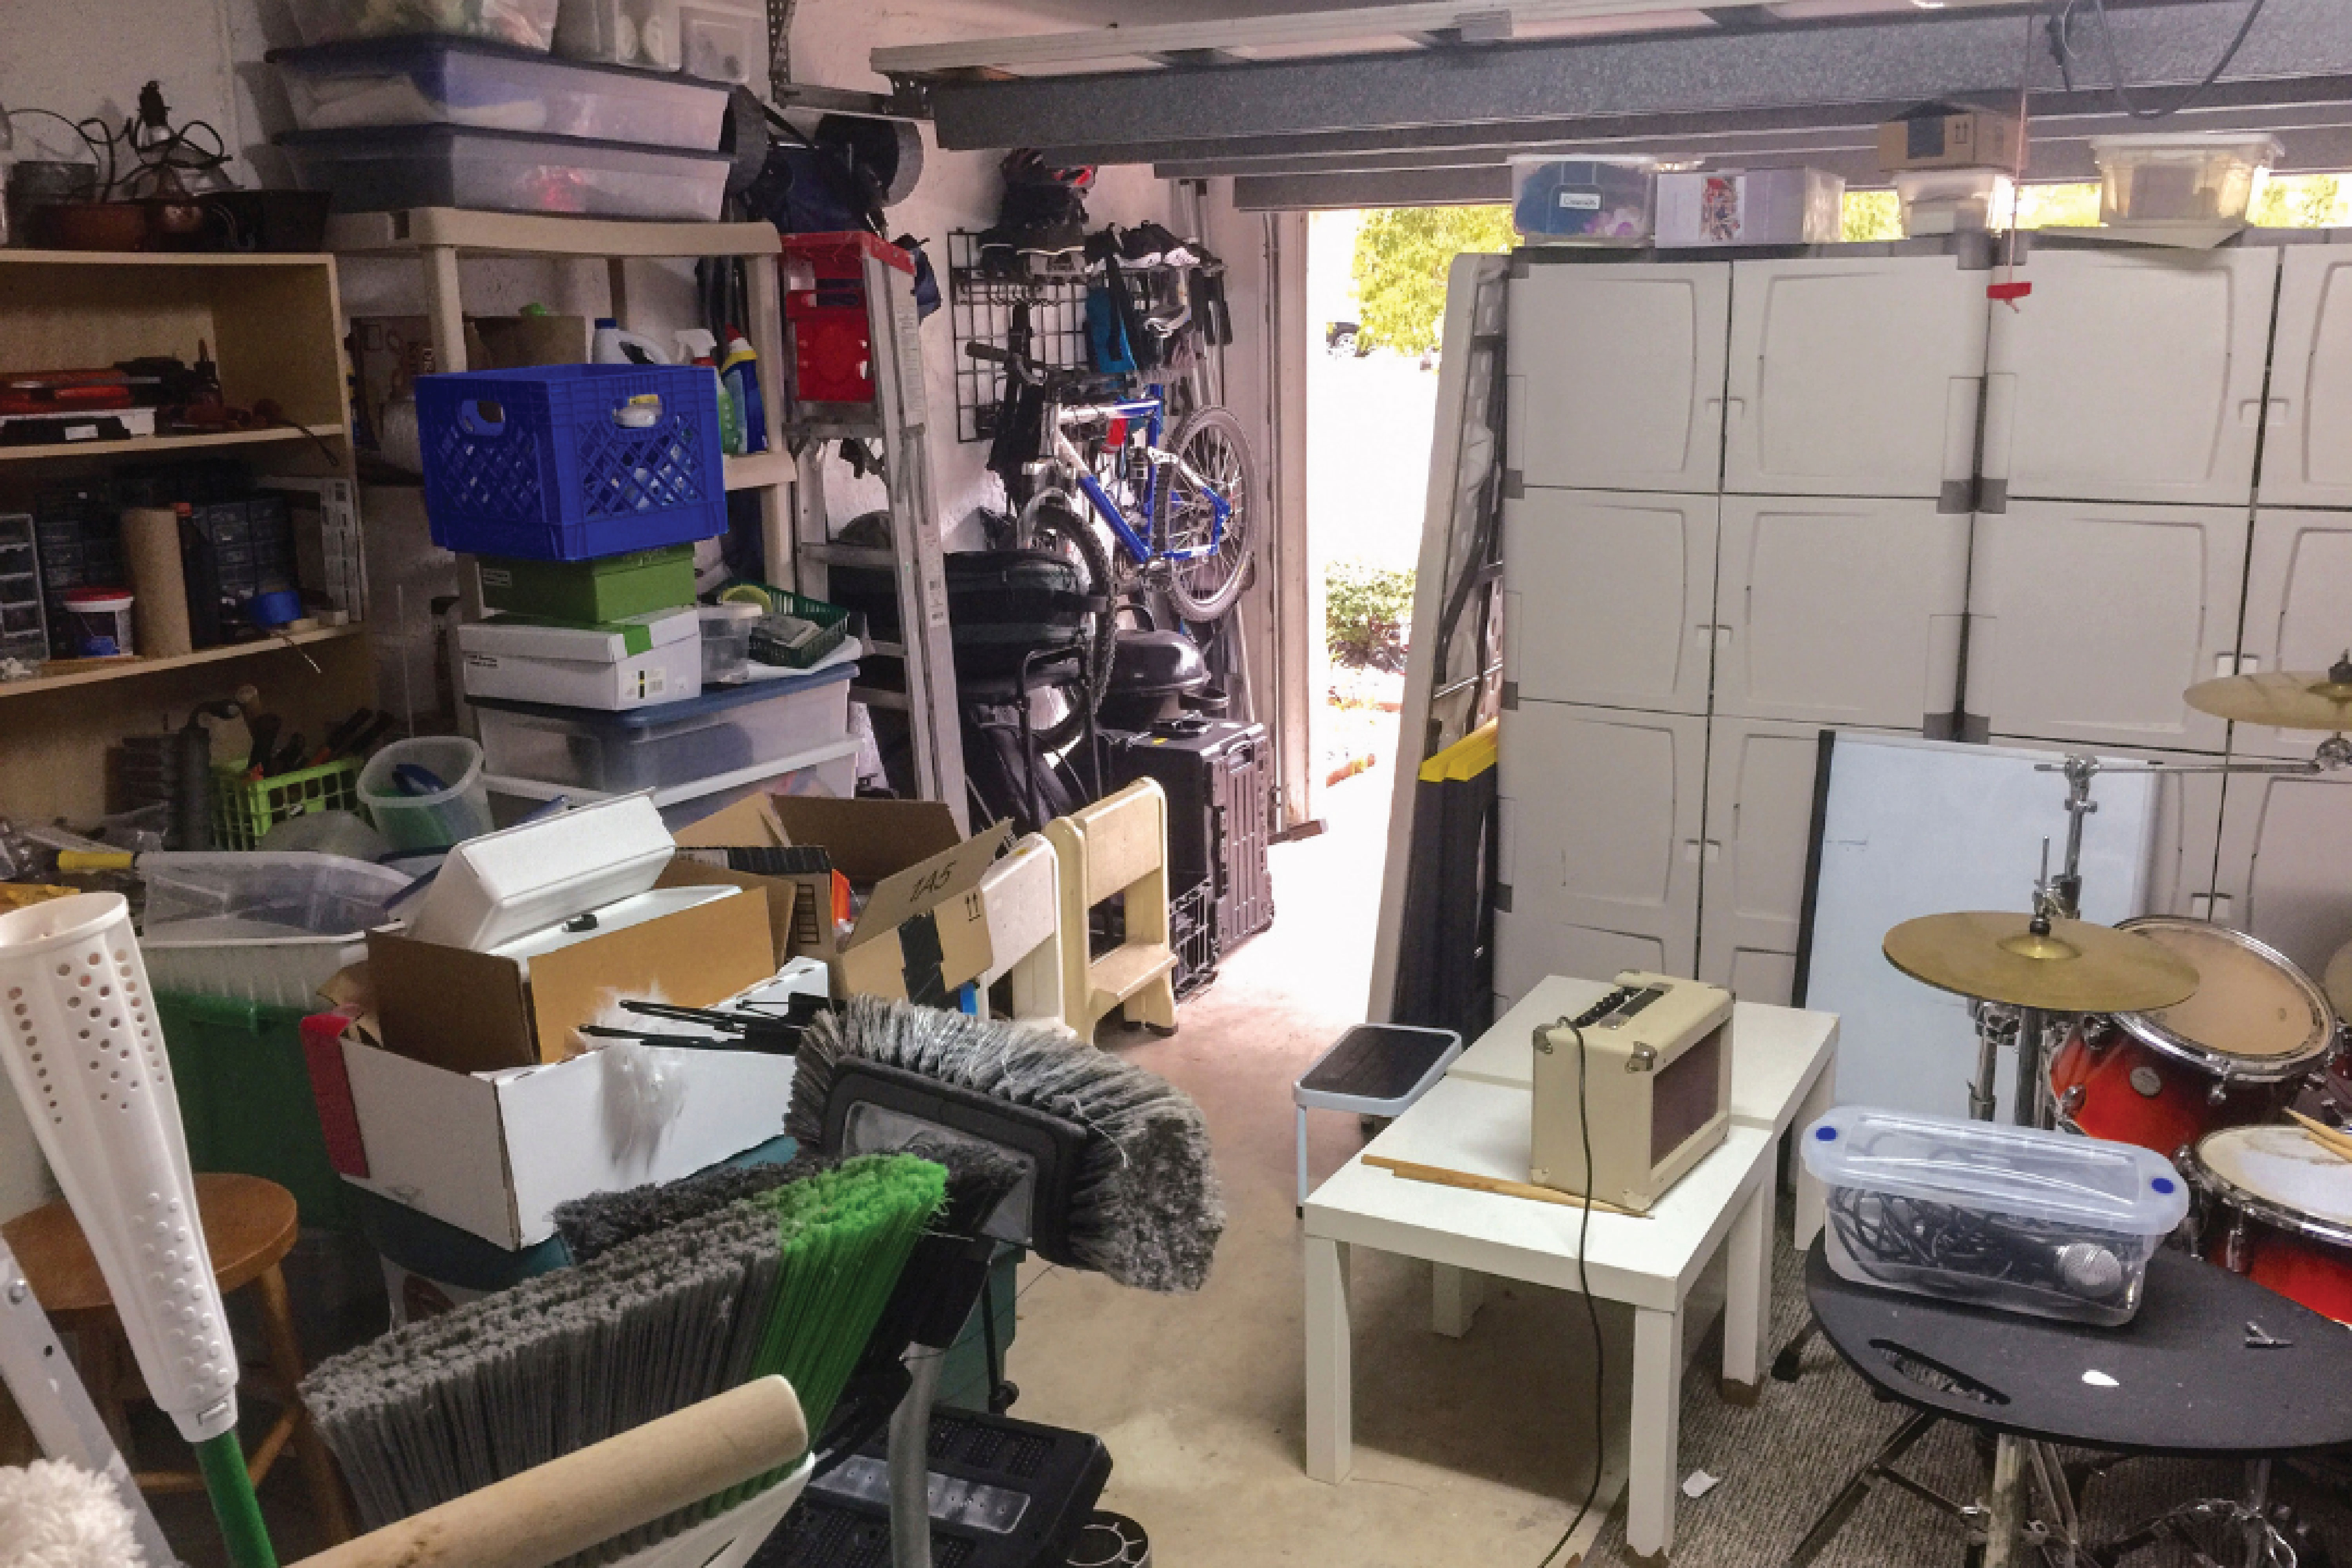 6 Tips for Spring Cleaning Your Garage